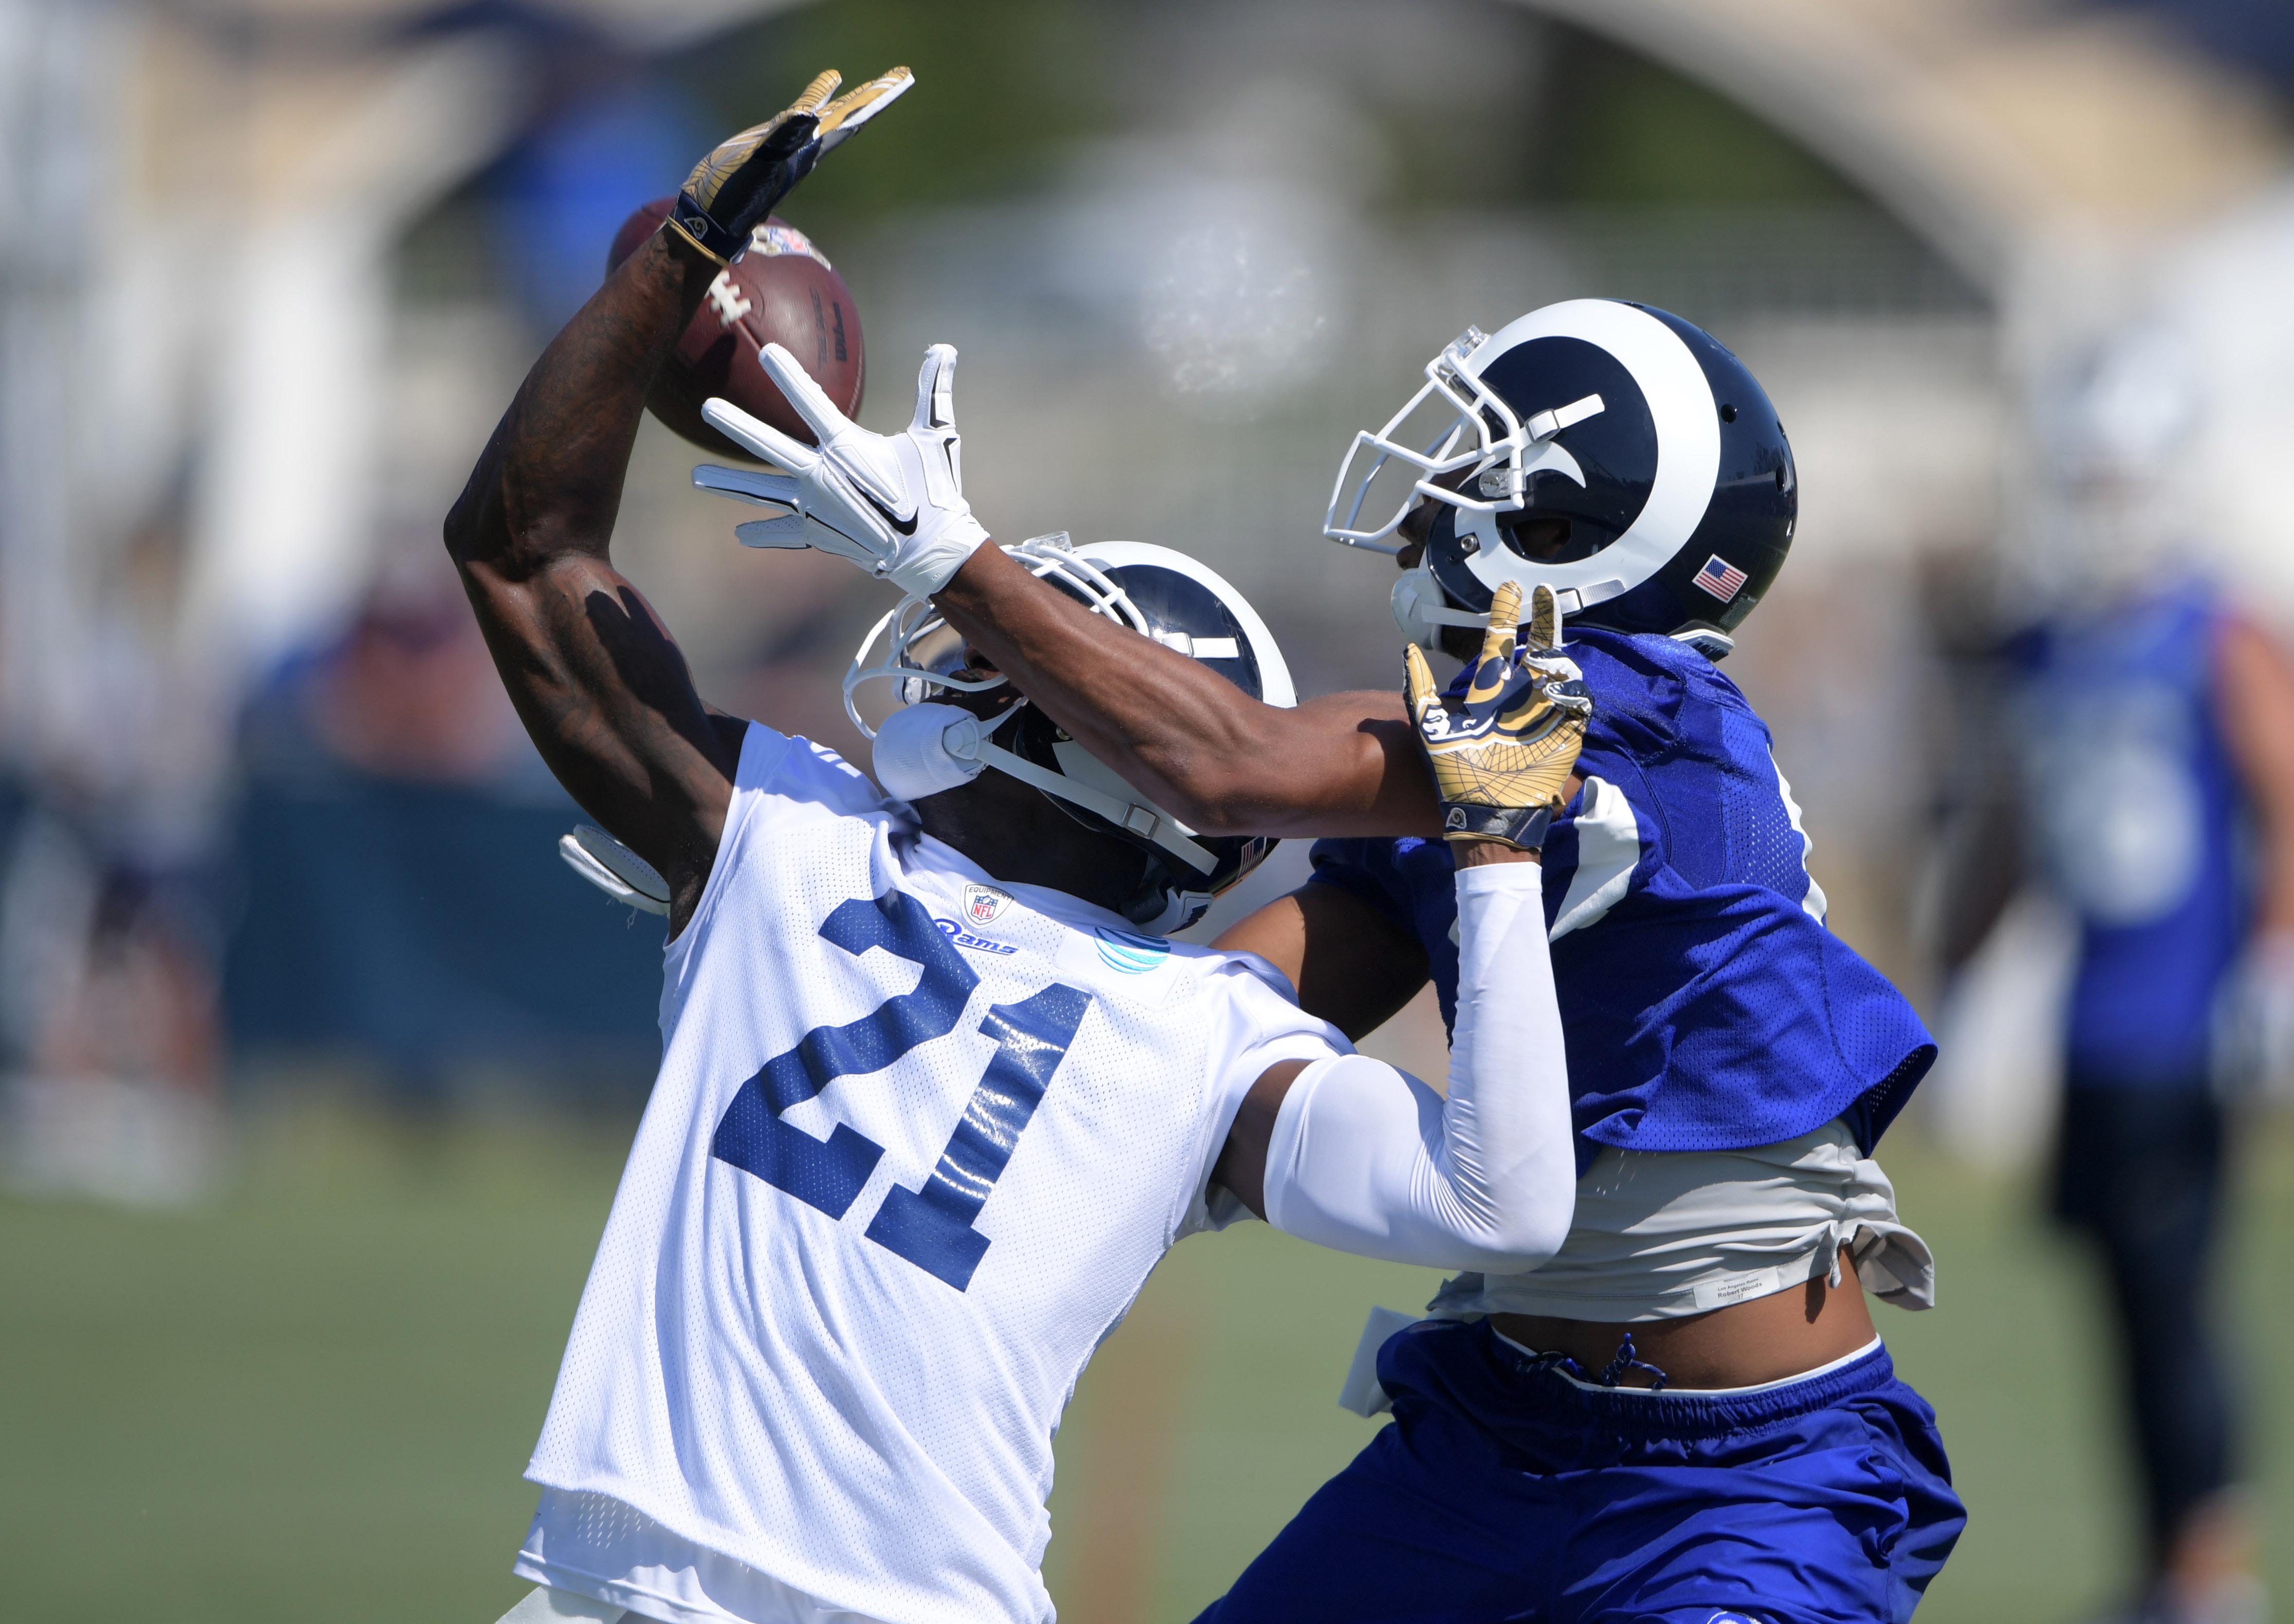 Los Angeles Rams WR Robert Woods tries to bring in a pass against former Rams CB Kayvon Webster during training camp, July 30, 2017.